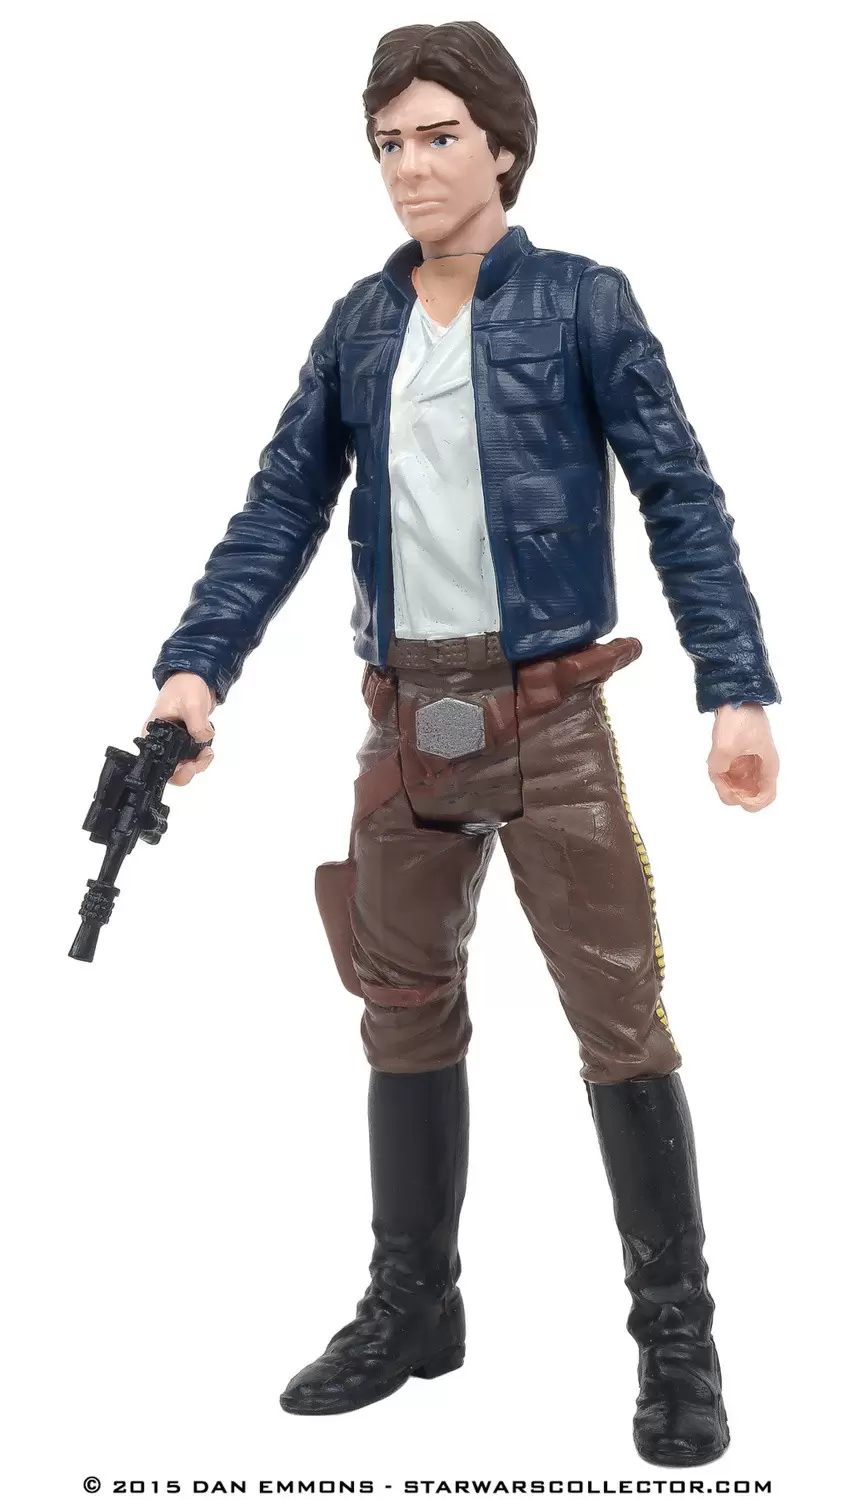 Han Solo (Bespin outfit) - Star Wars Rebels action figure